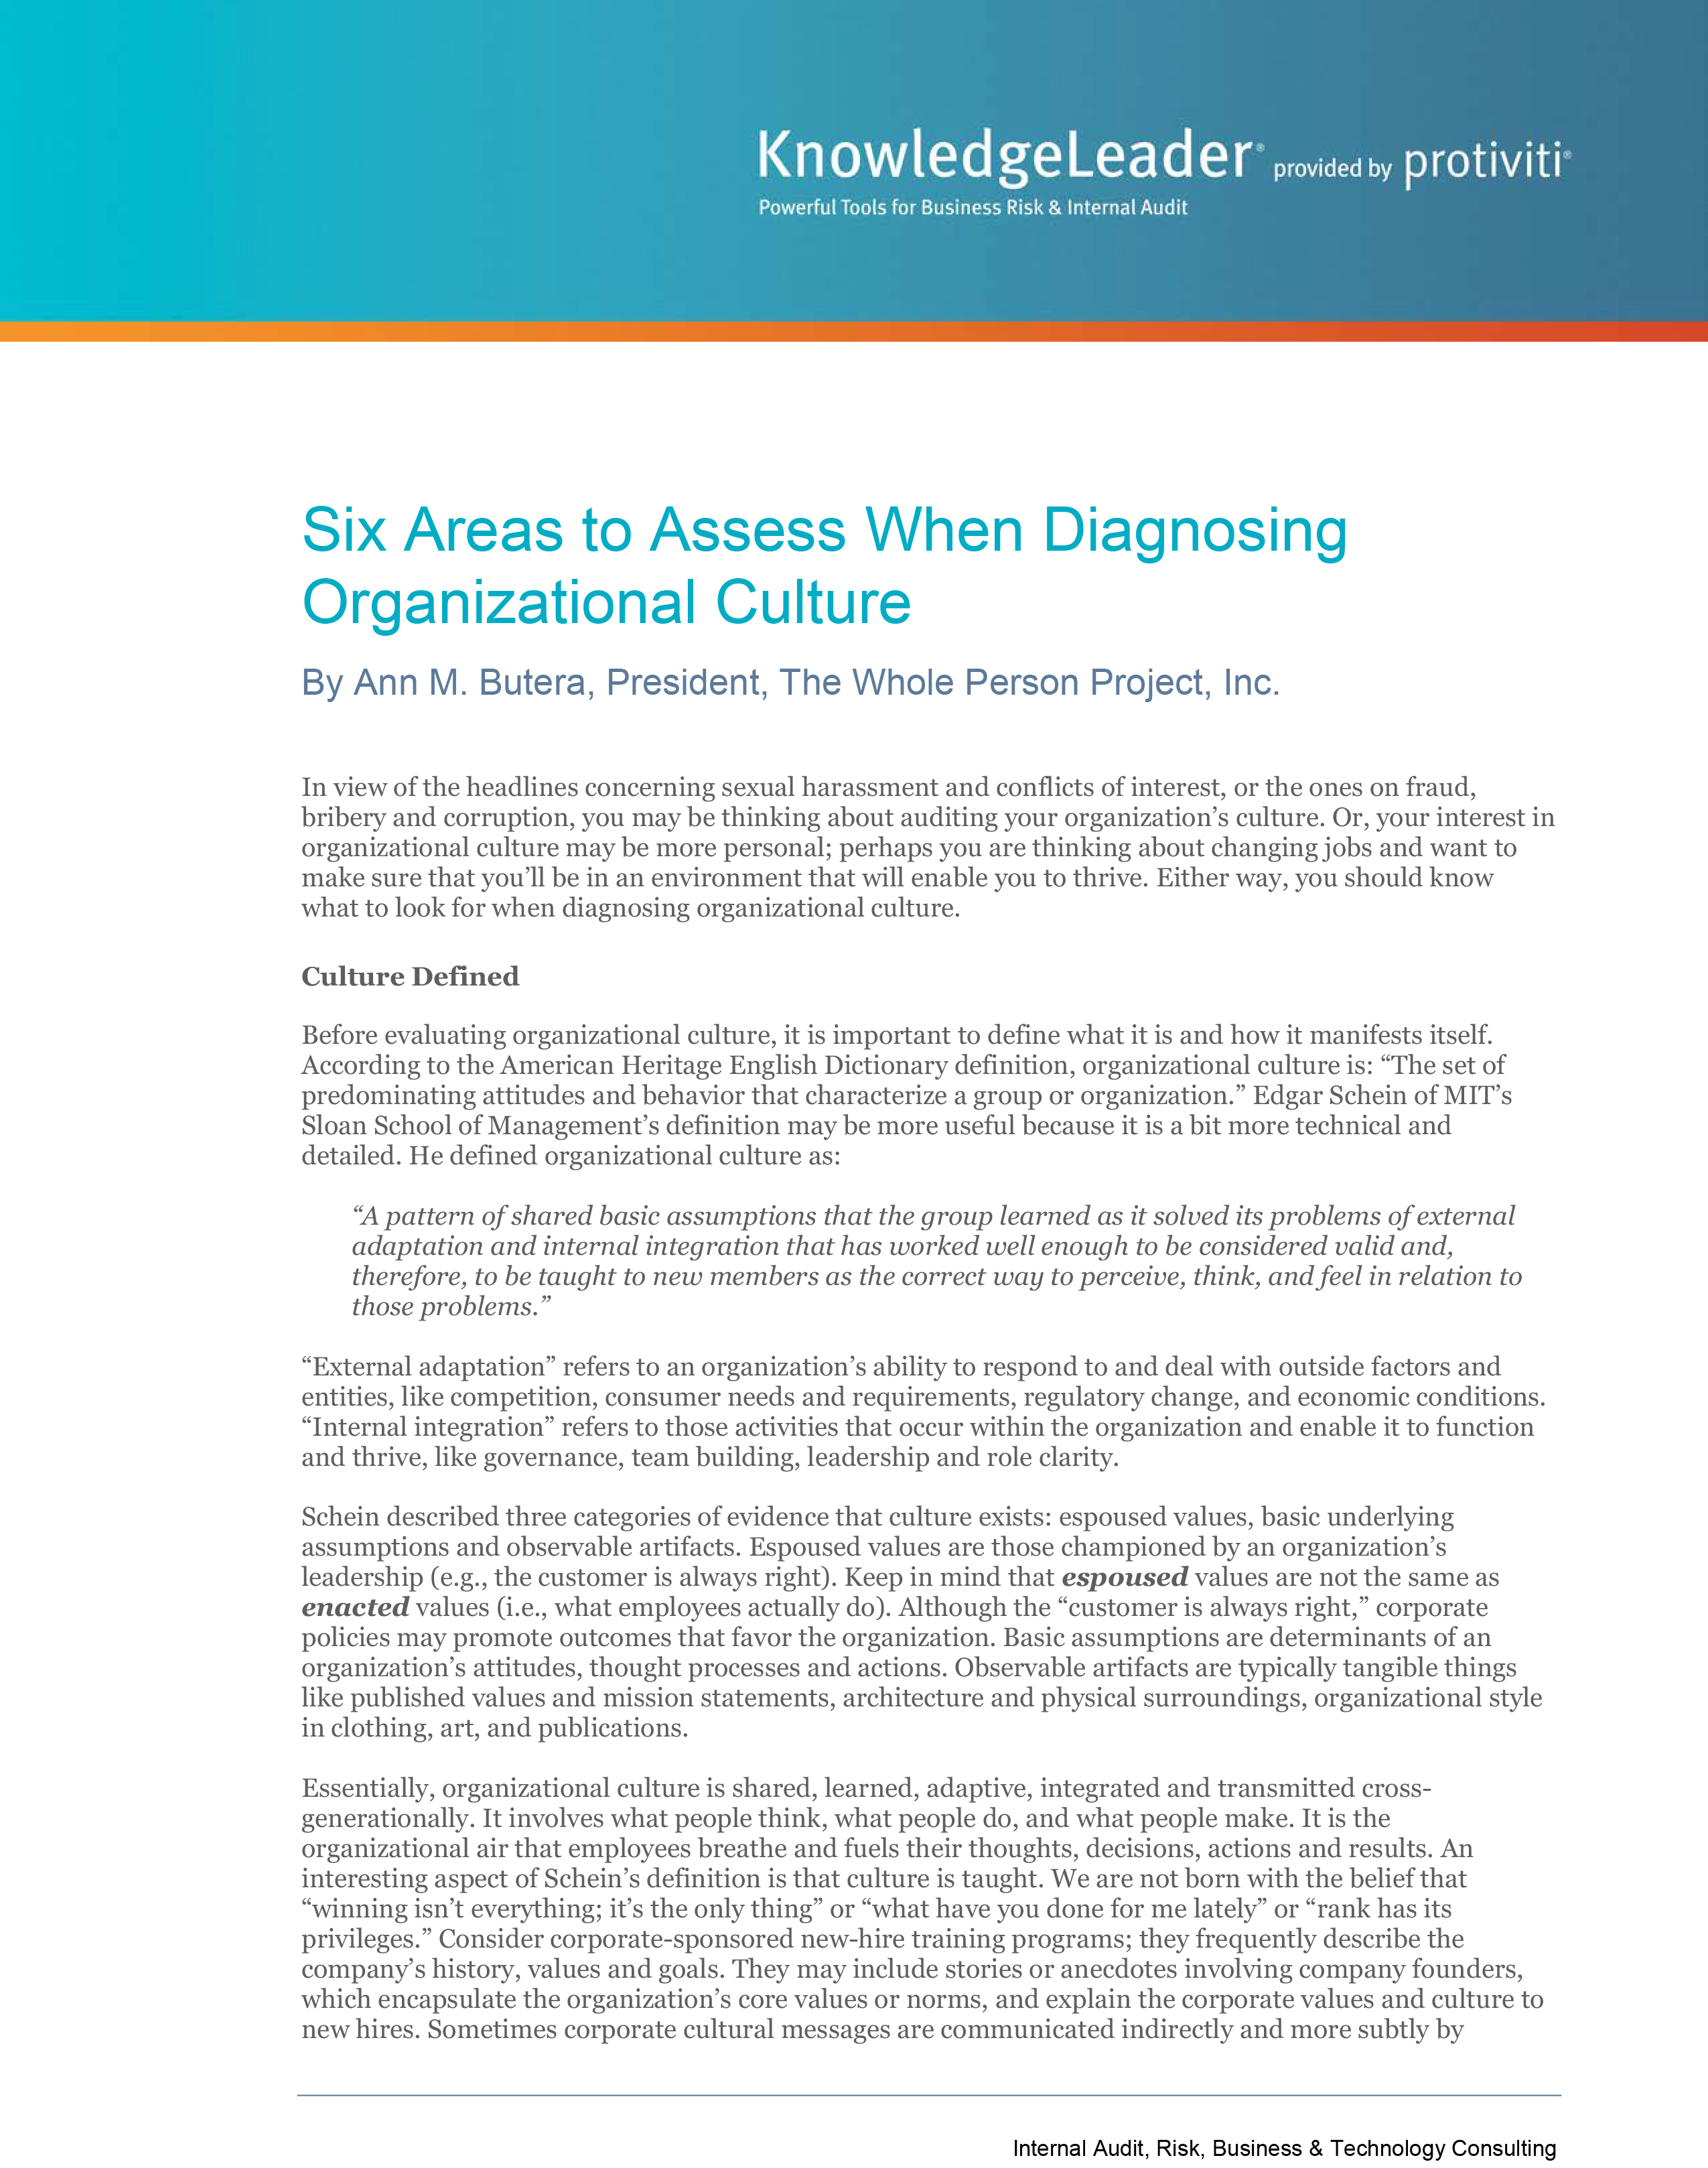 Screenshot of the first page of Six Areas to Assess When Diagnosing Organizational Culture